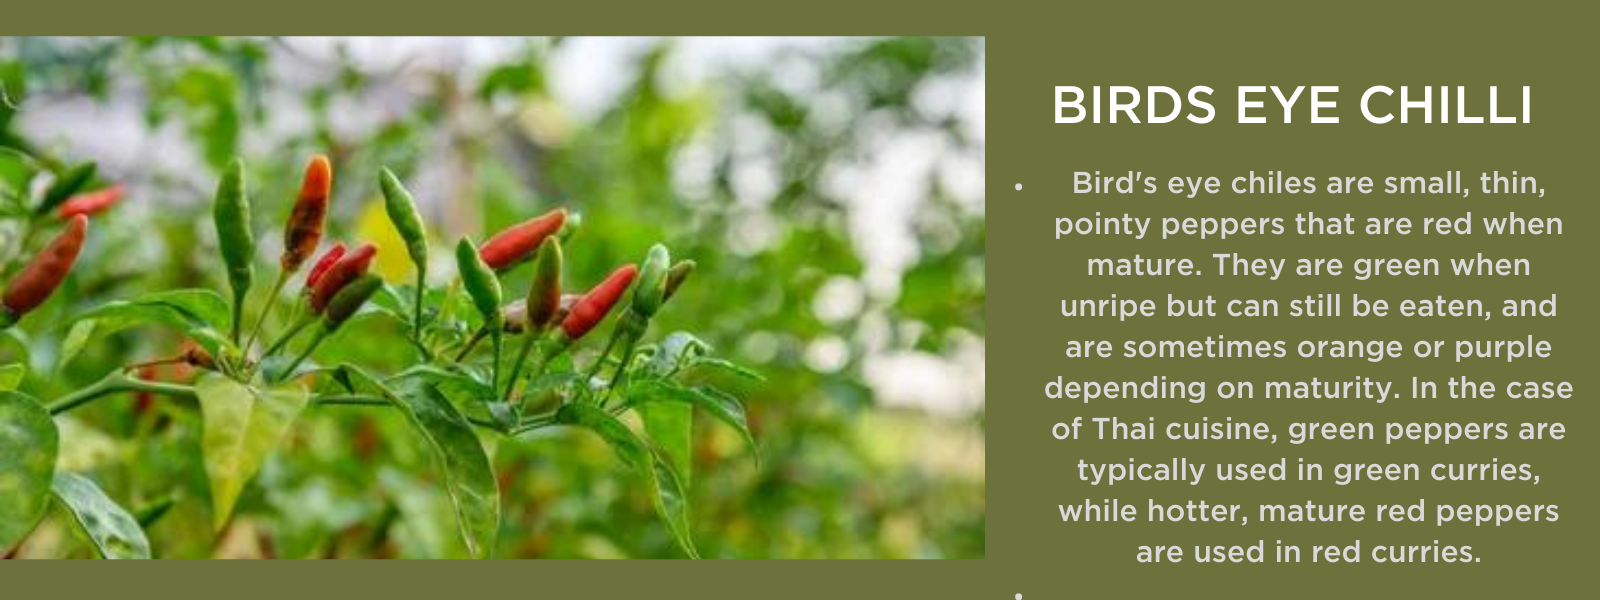 Birds eye chilli - Health Benefits, Uses and Important Facts